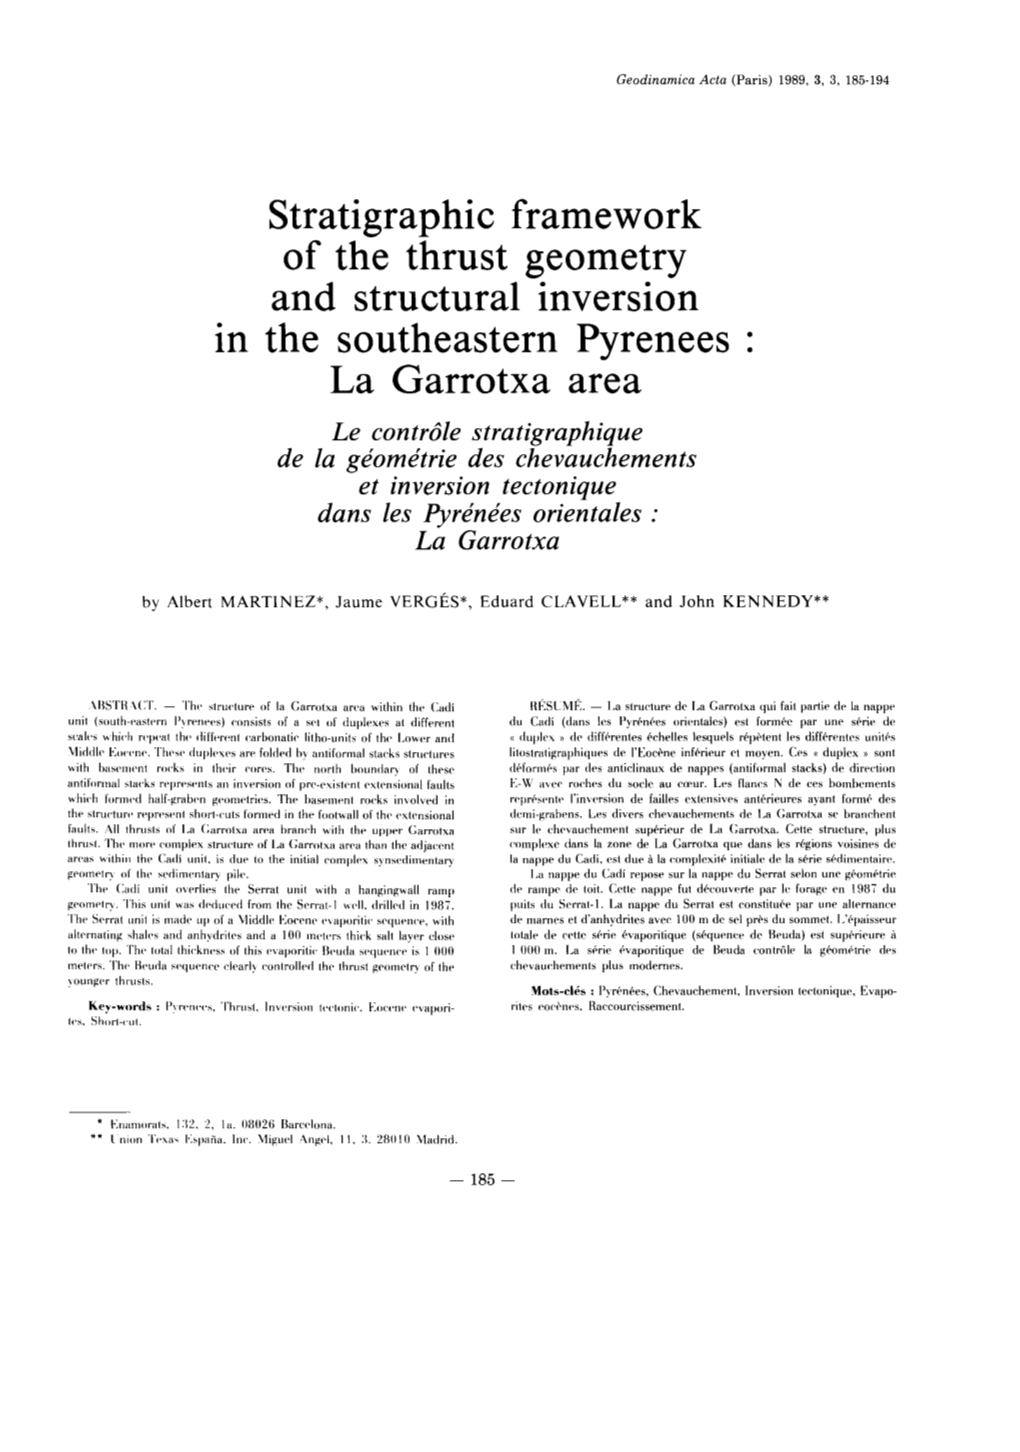 Stratigraphic Framework of the Thrust Geometry and Structural Inversion